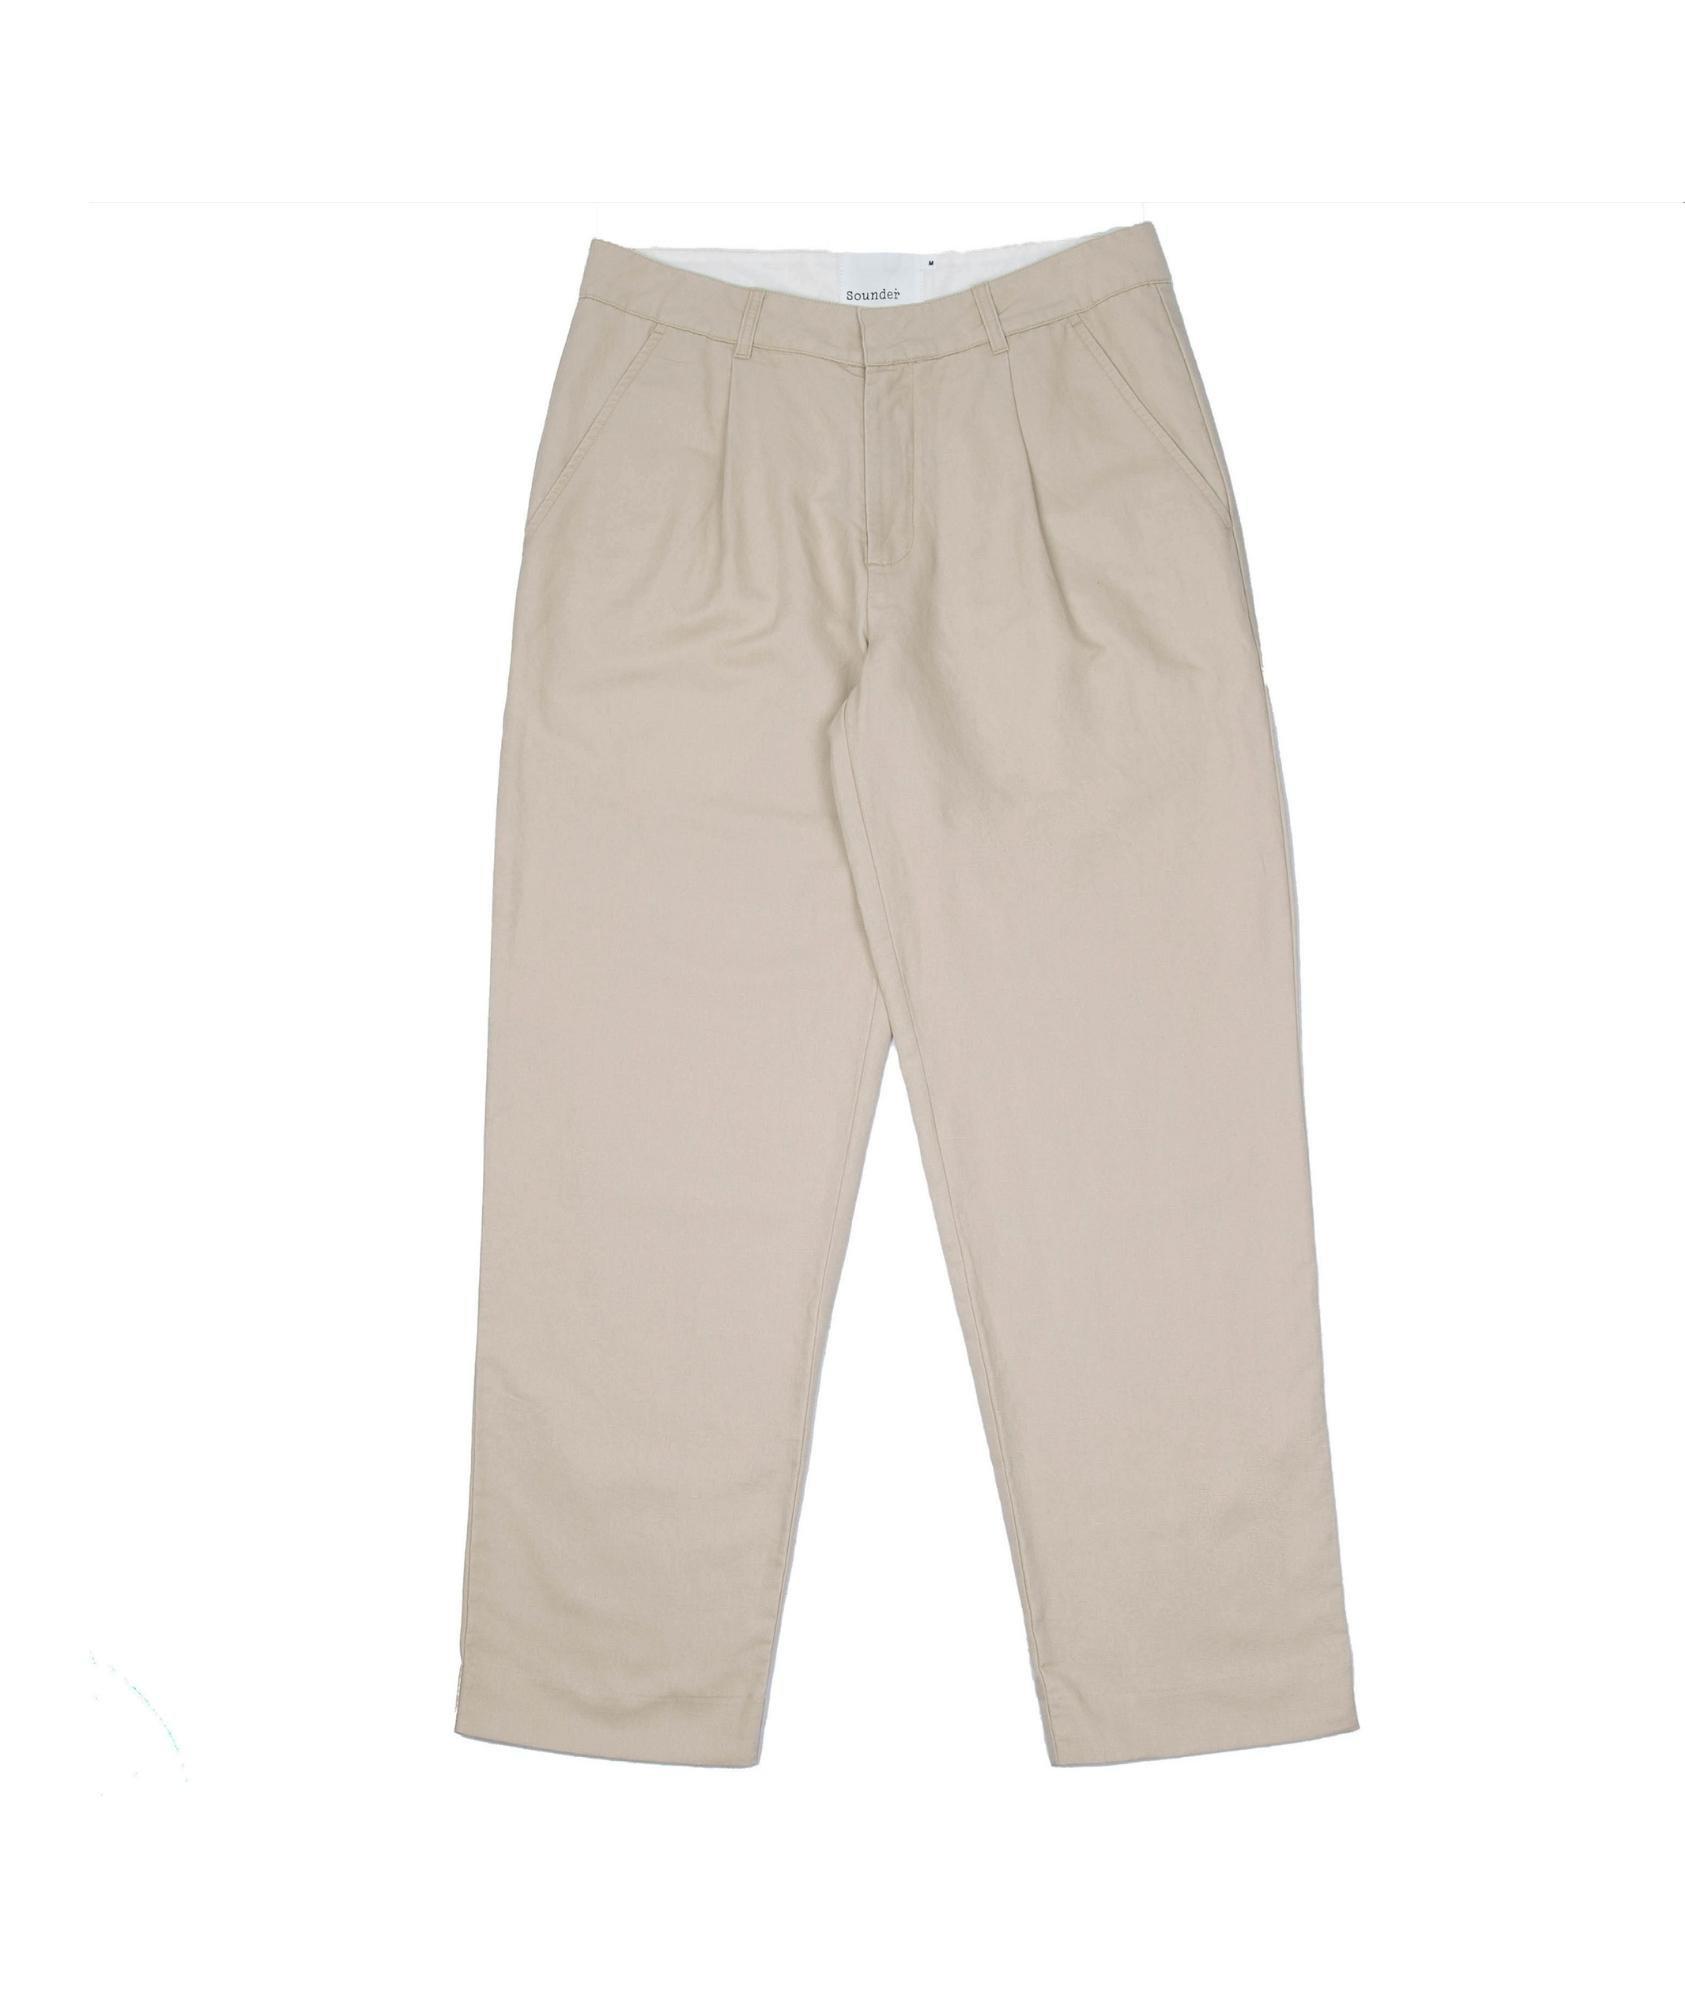 Strider Trousers image 0